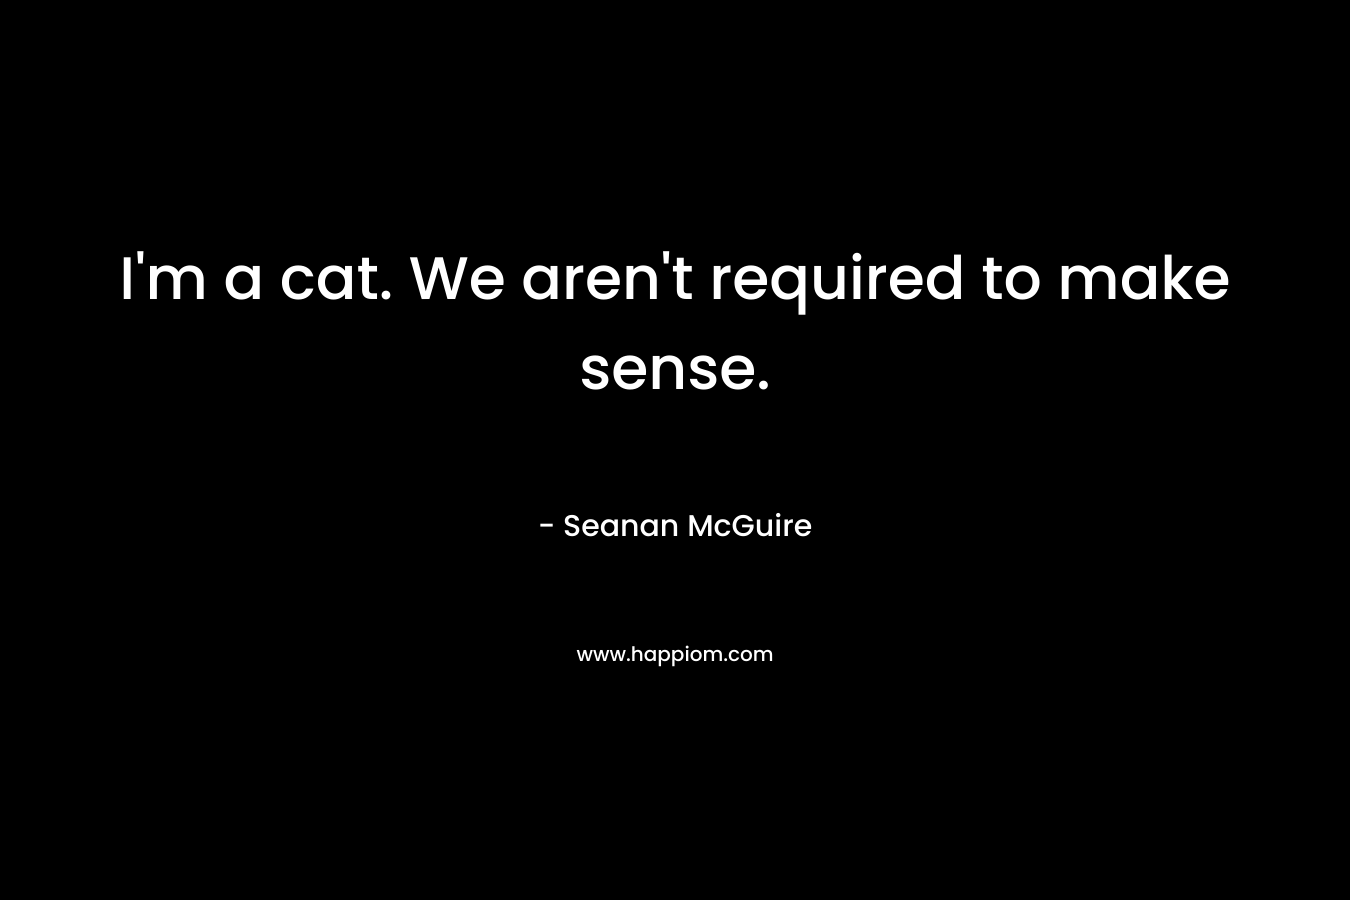 I’m a cat. We aren’t required to make sense. – Seanan McGuire